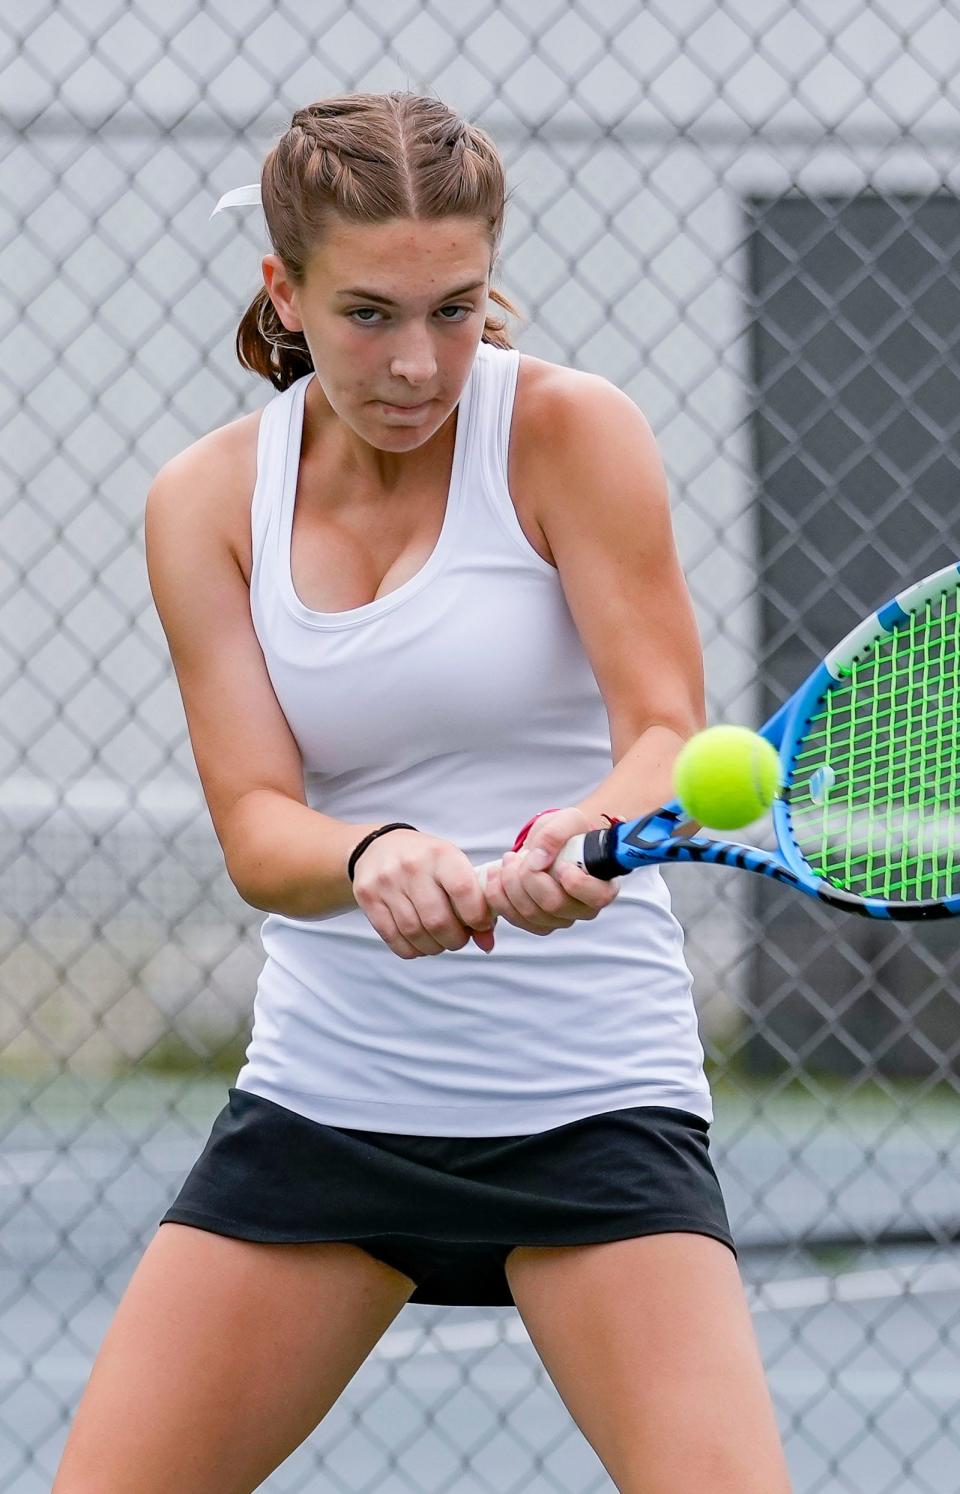 DSHA's Molly Jex competes at the Arrowhead tennis invitational in Hartland last August. Jex and Lizzie Stuckslager won a Division 1 doubles pairing championship at the WIAA state girls tennis tournament Saturday in Madison.